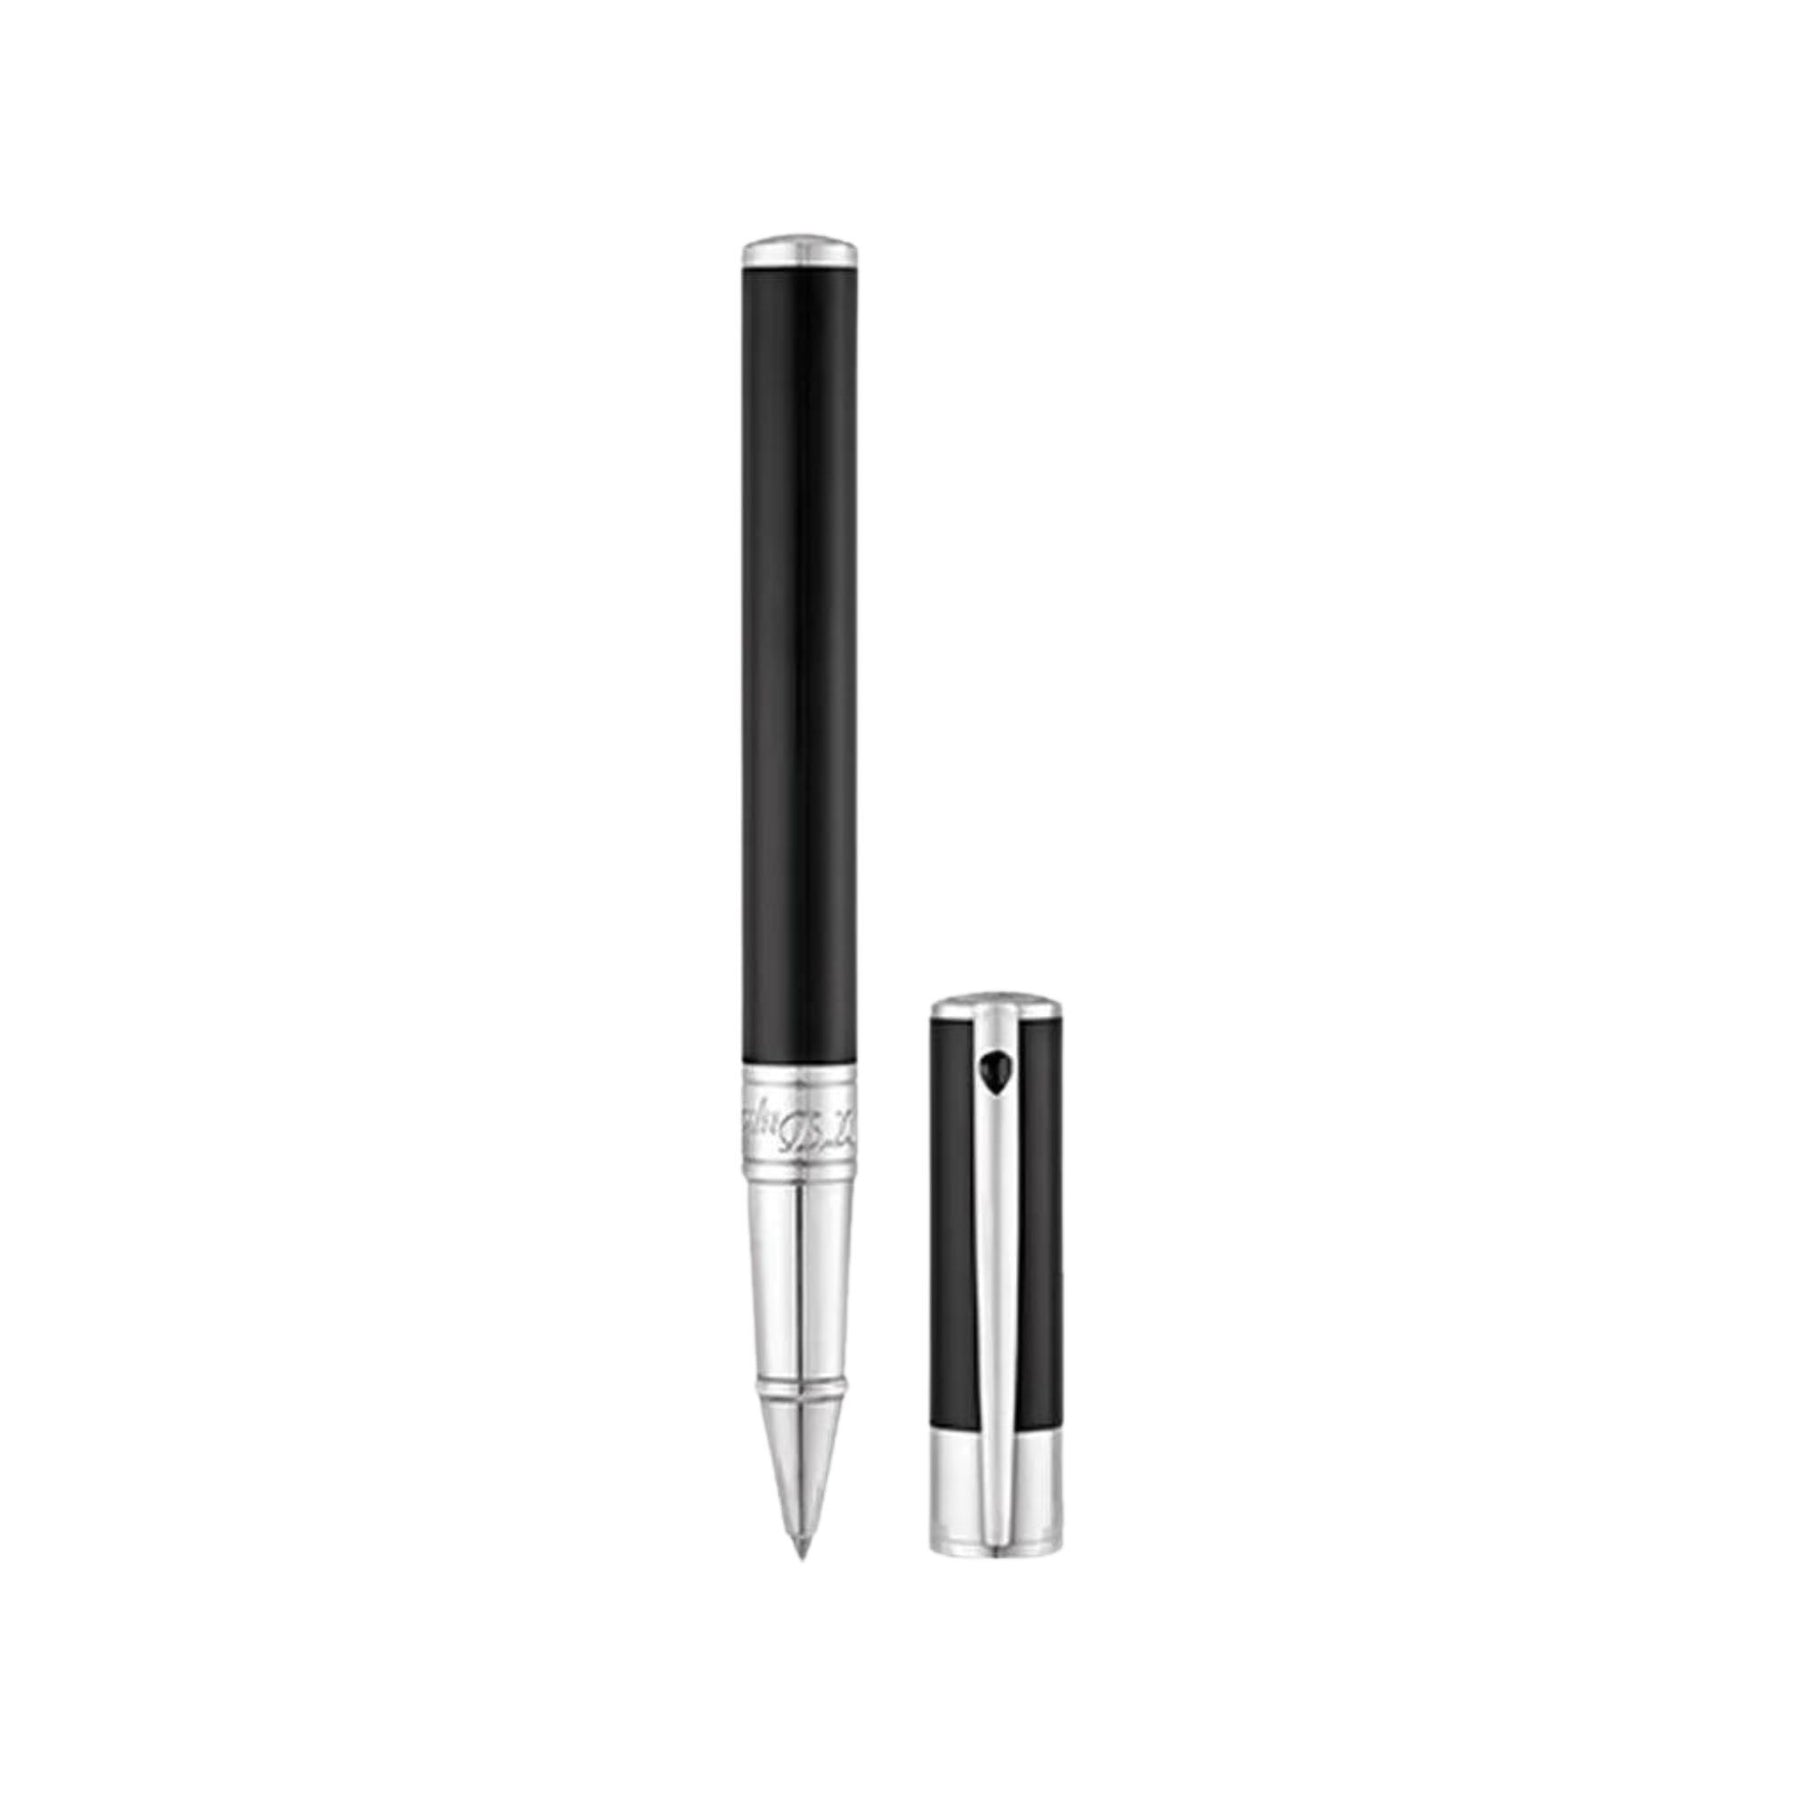 S.T. DUPONT | D-INITIAL Black and Chrome - Penna roller